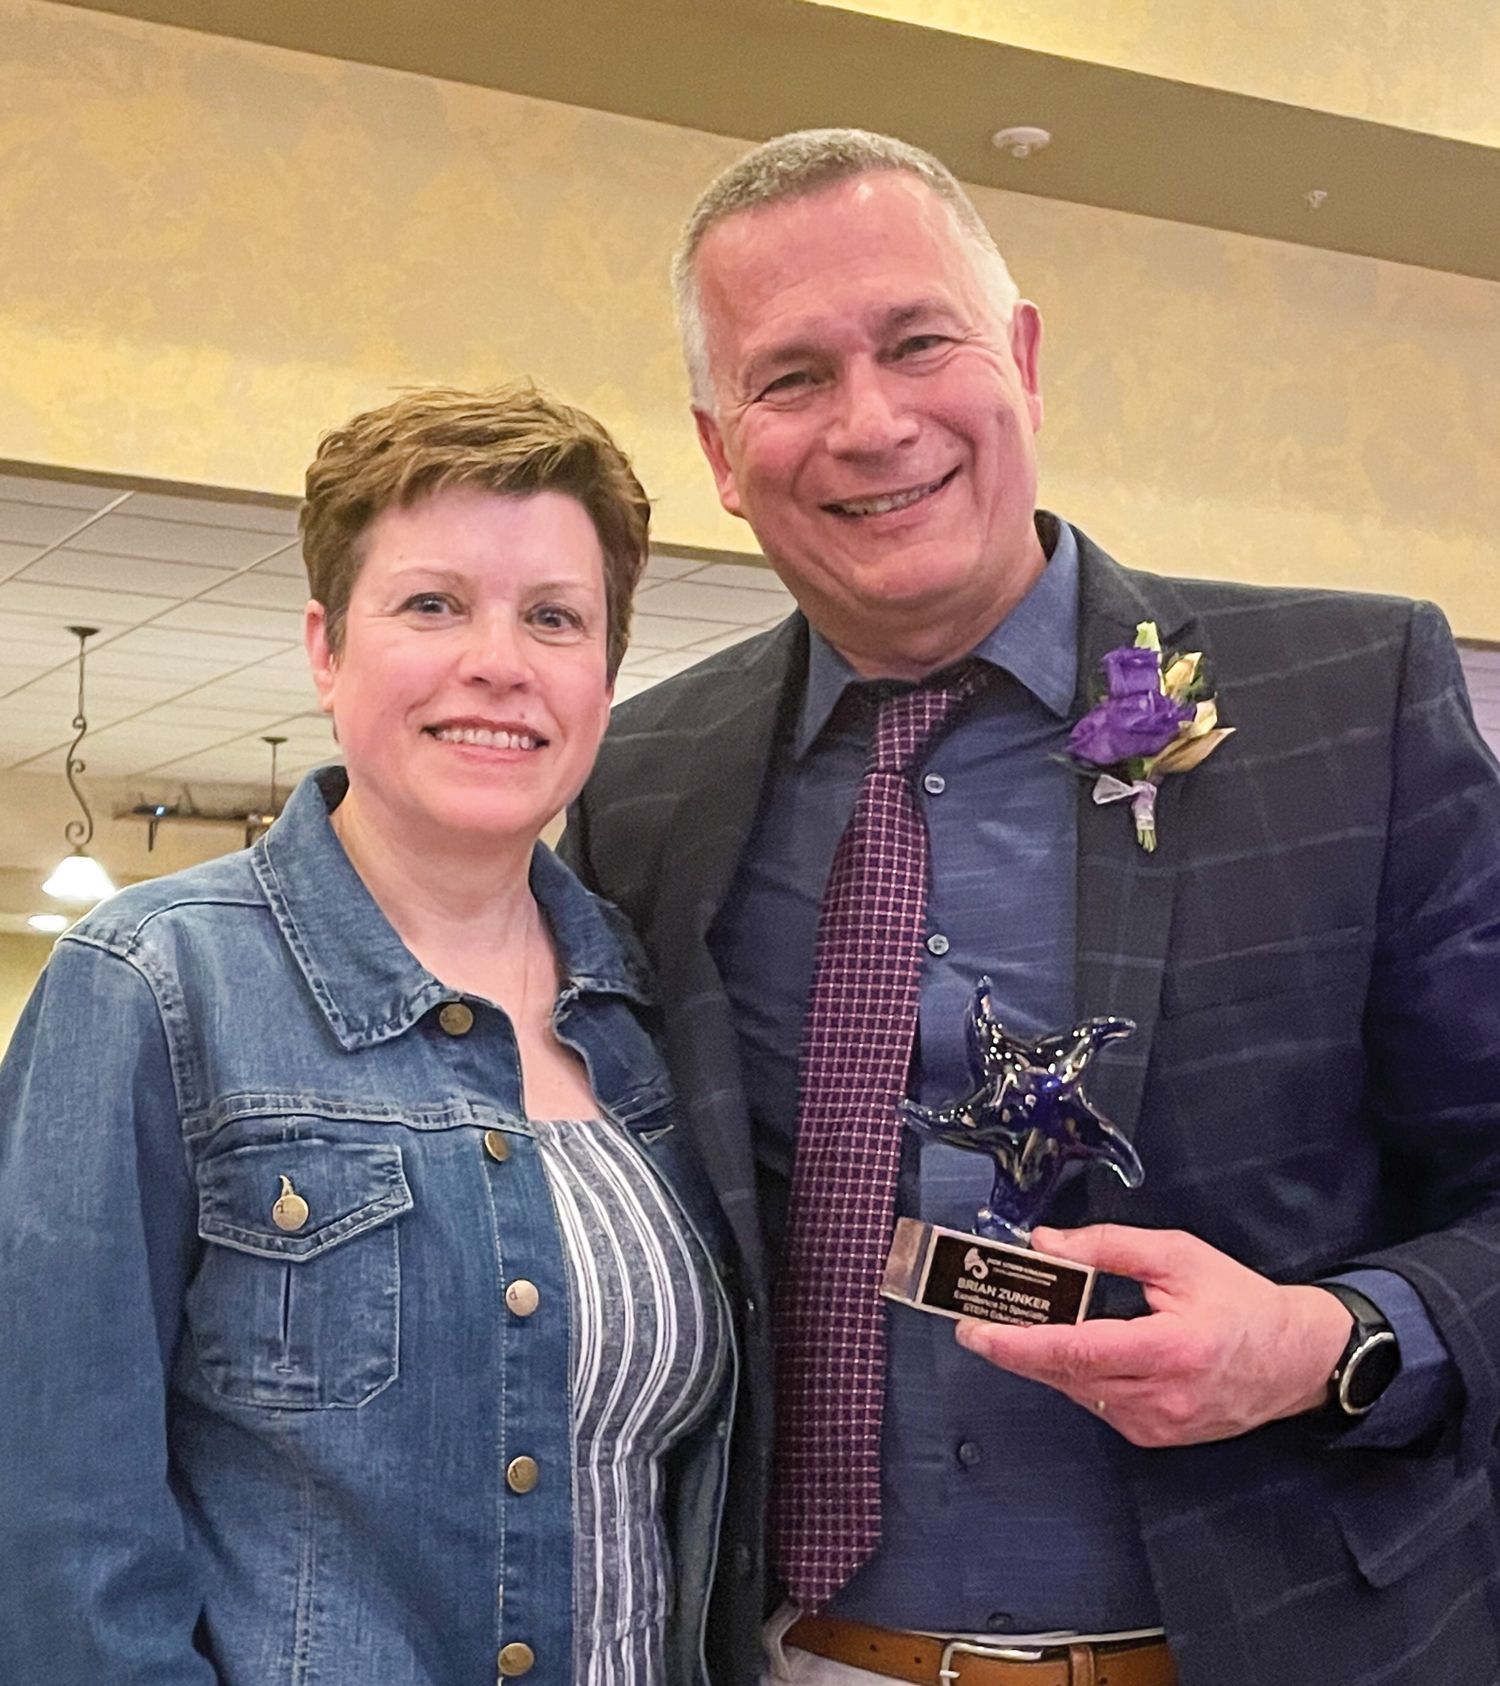 Brian Zunker, holding his Shining Star Award, and wearing a purple flower on his lapel. He has his arm around his wife, Deb